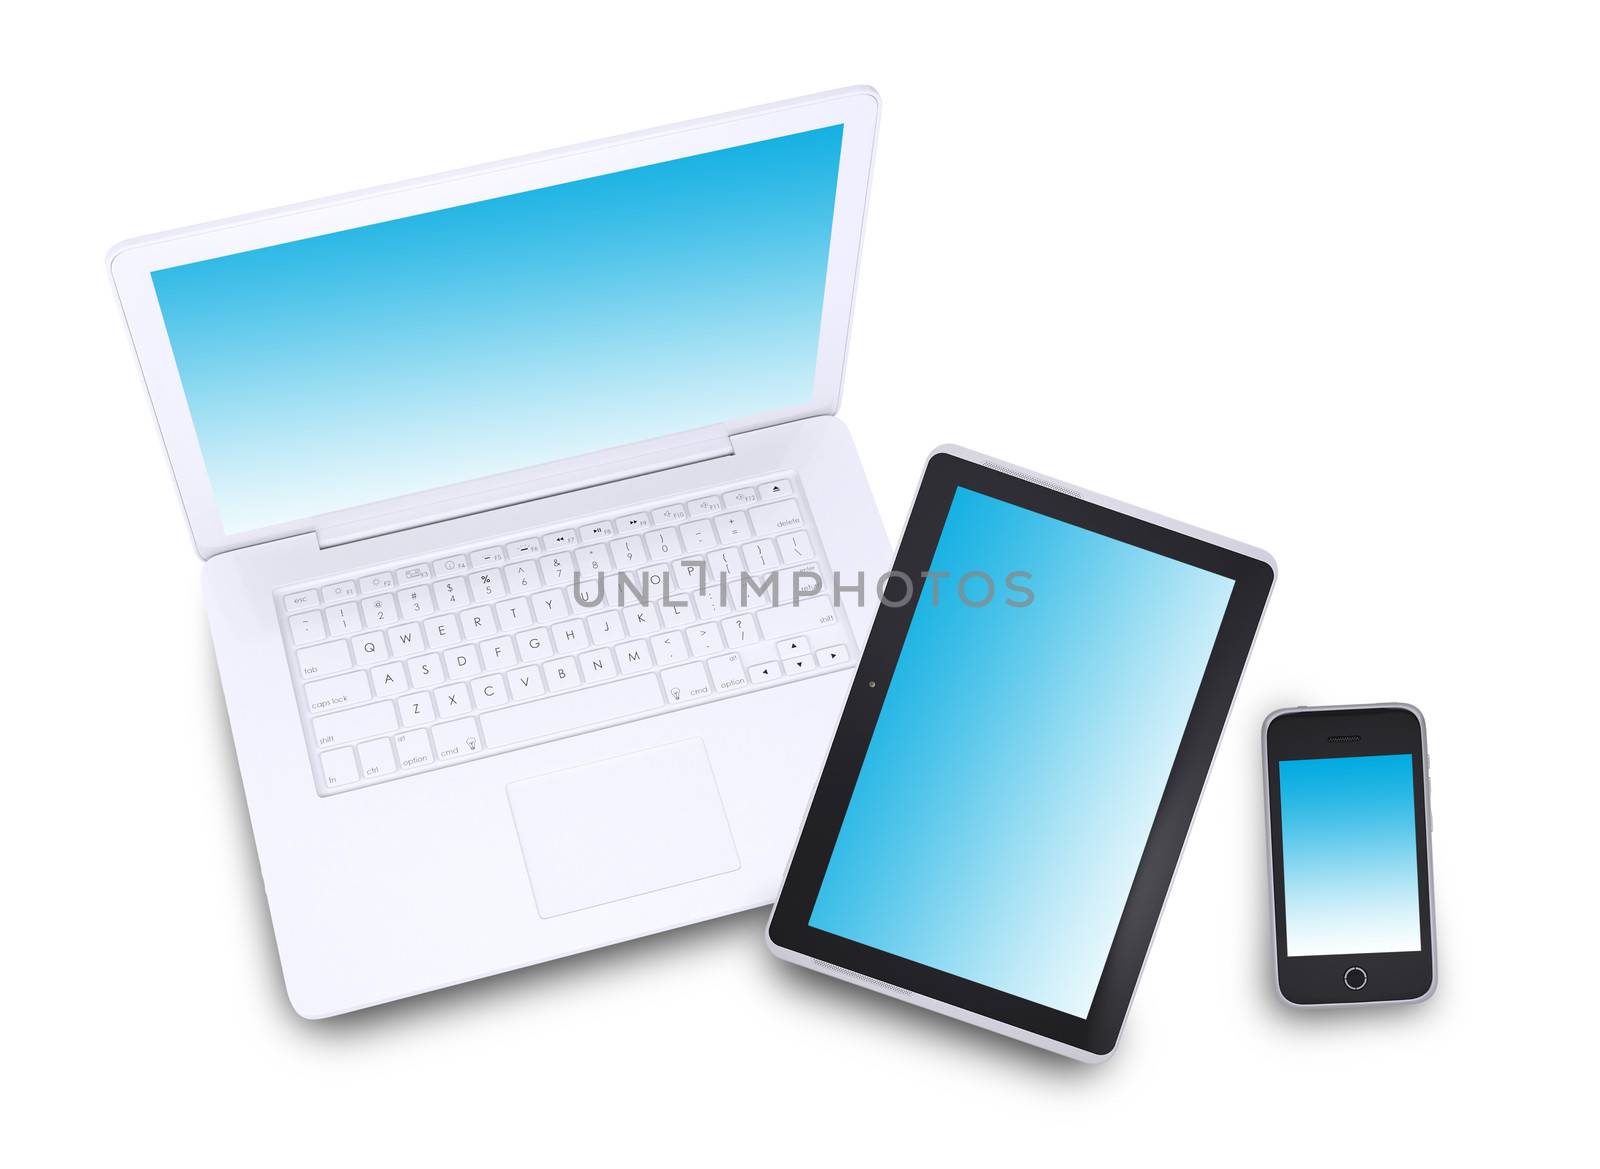 Laptop, tablet pc and smartphone by cherezoff